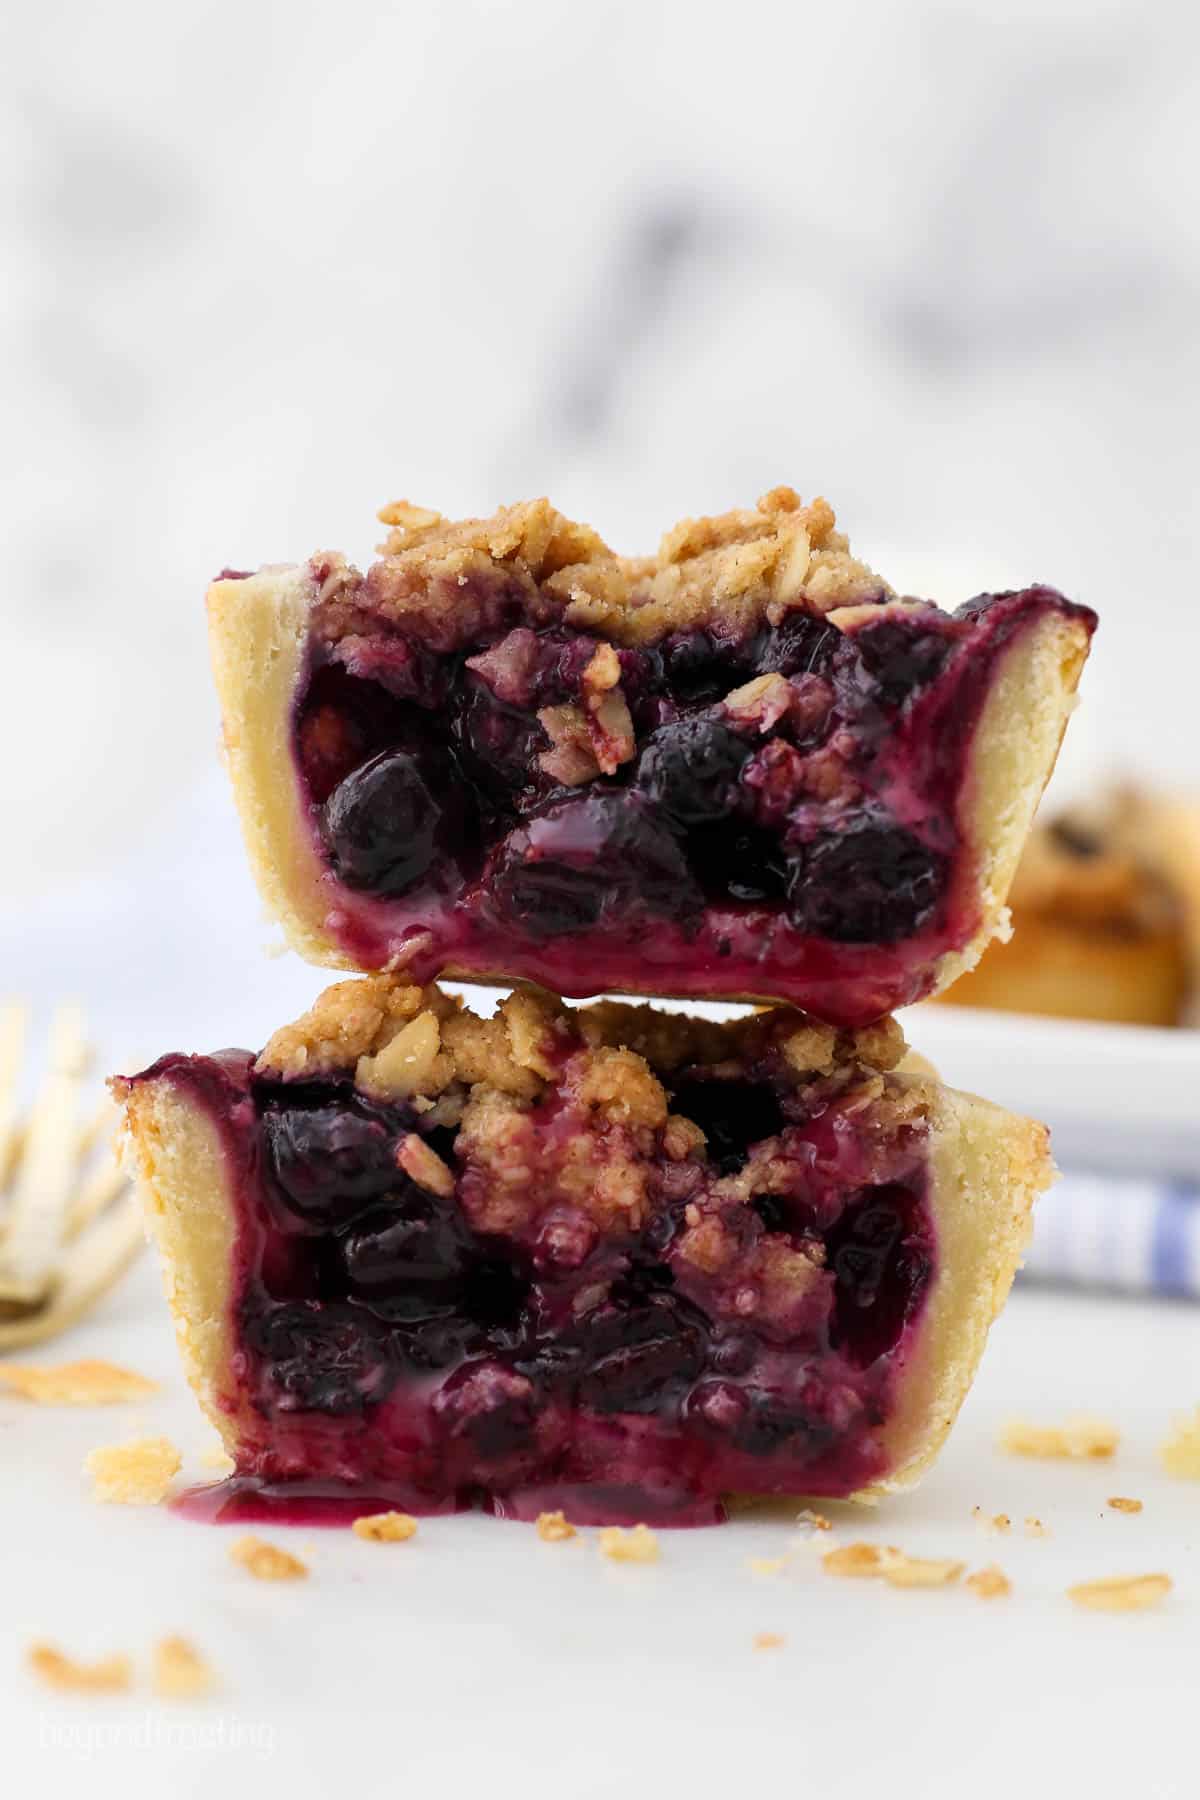 A mini blueberry pie cut in half to show the filling inside